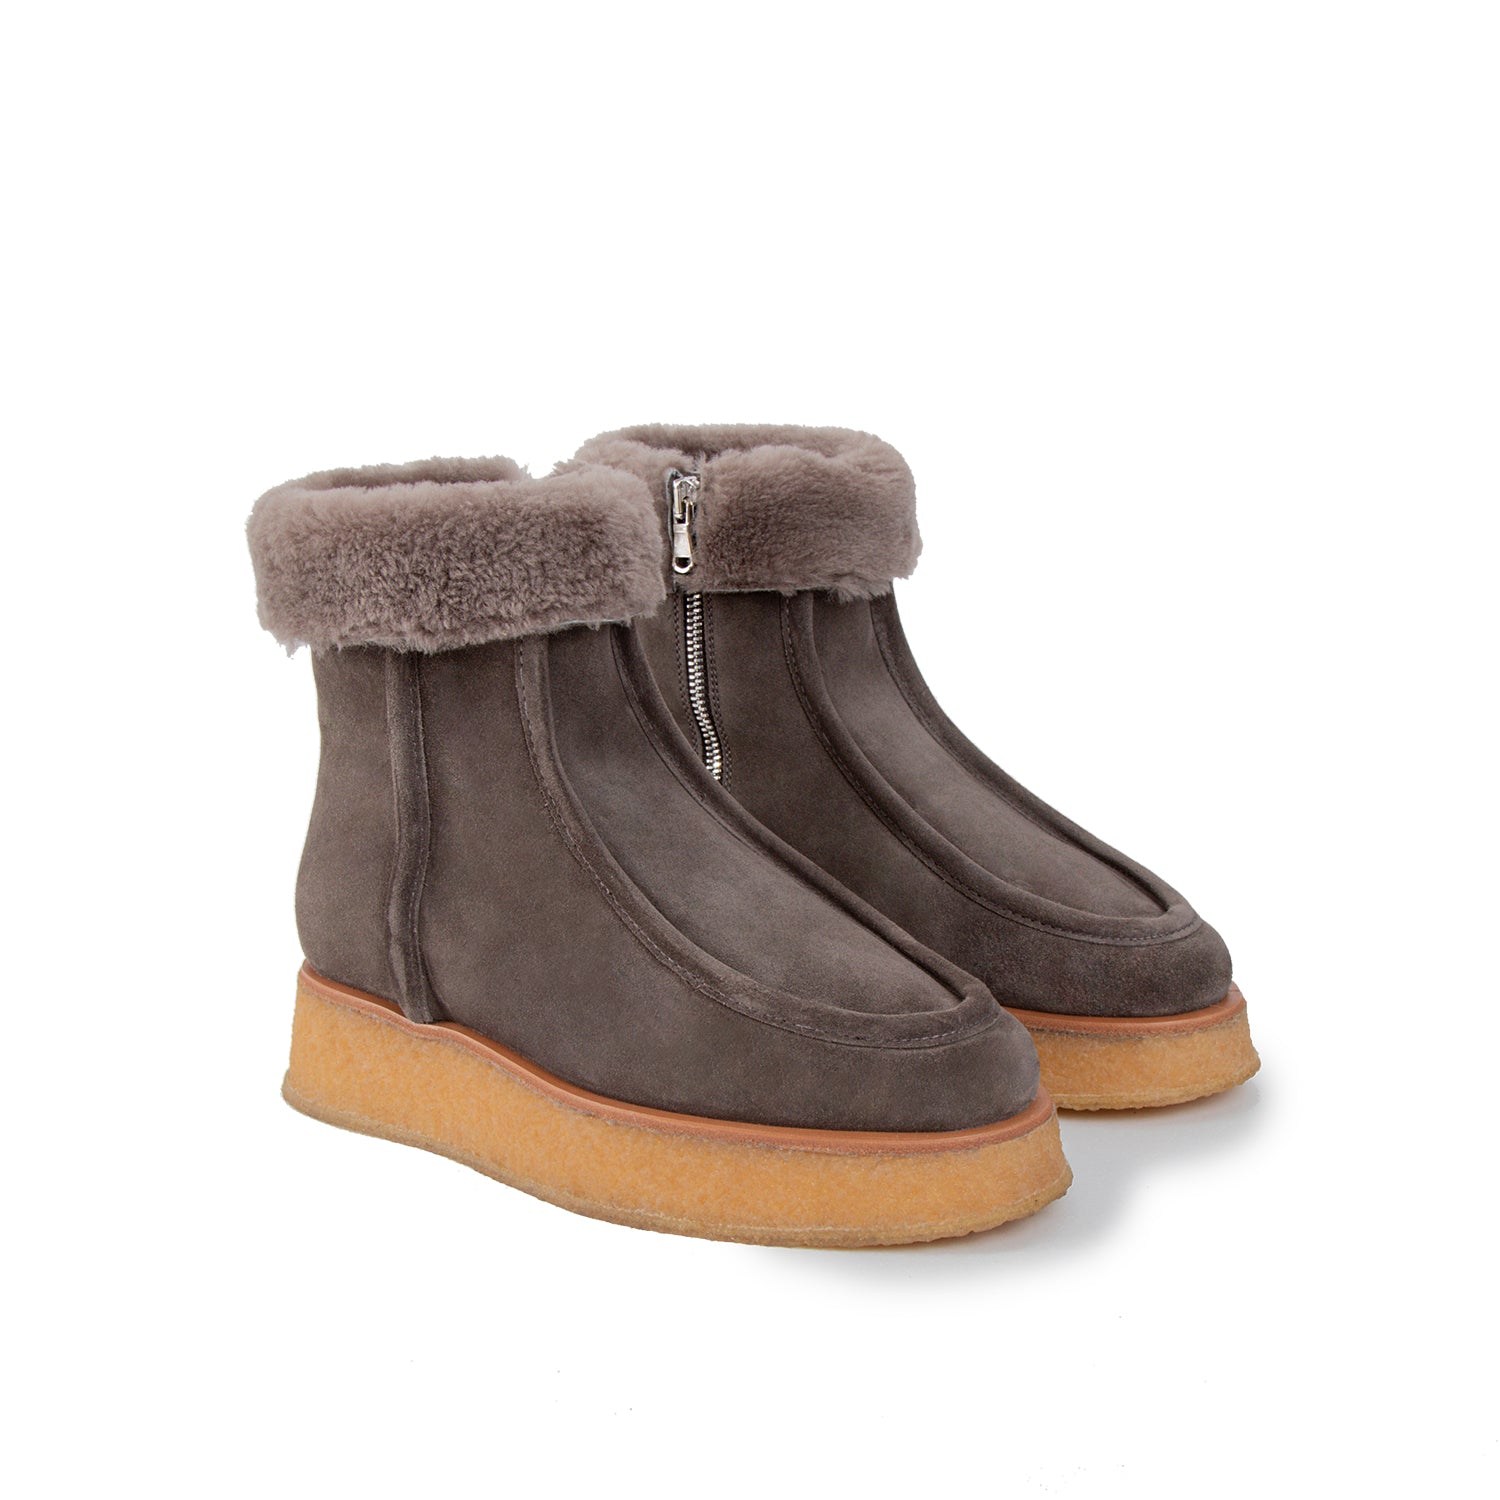 SCLARANDIS - GIANNA Taupe Ankle Boots, buy at DOORS NYC